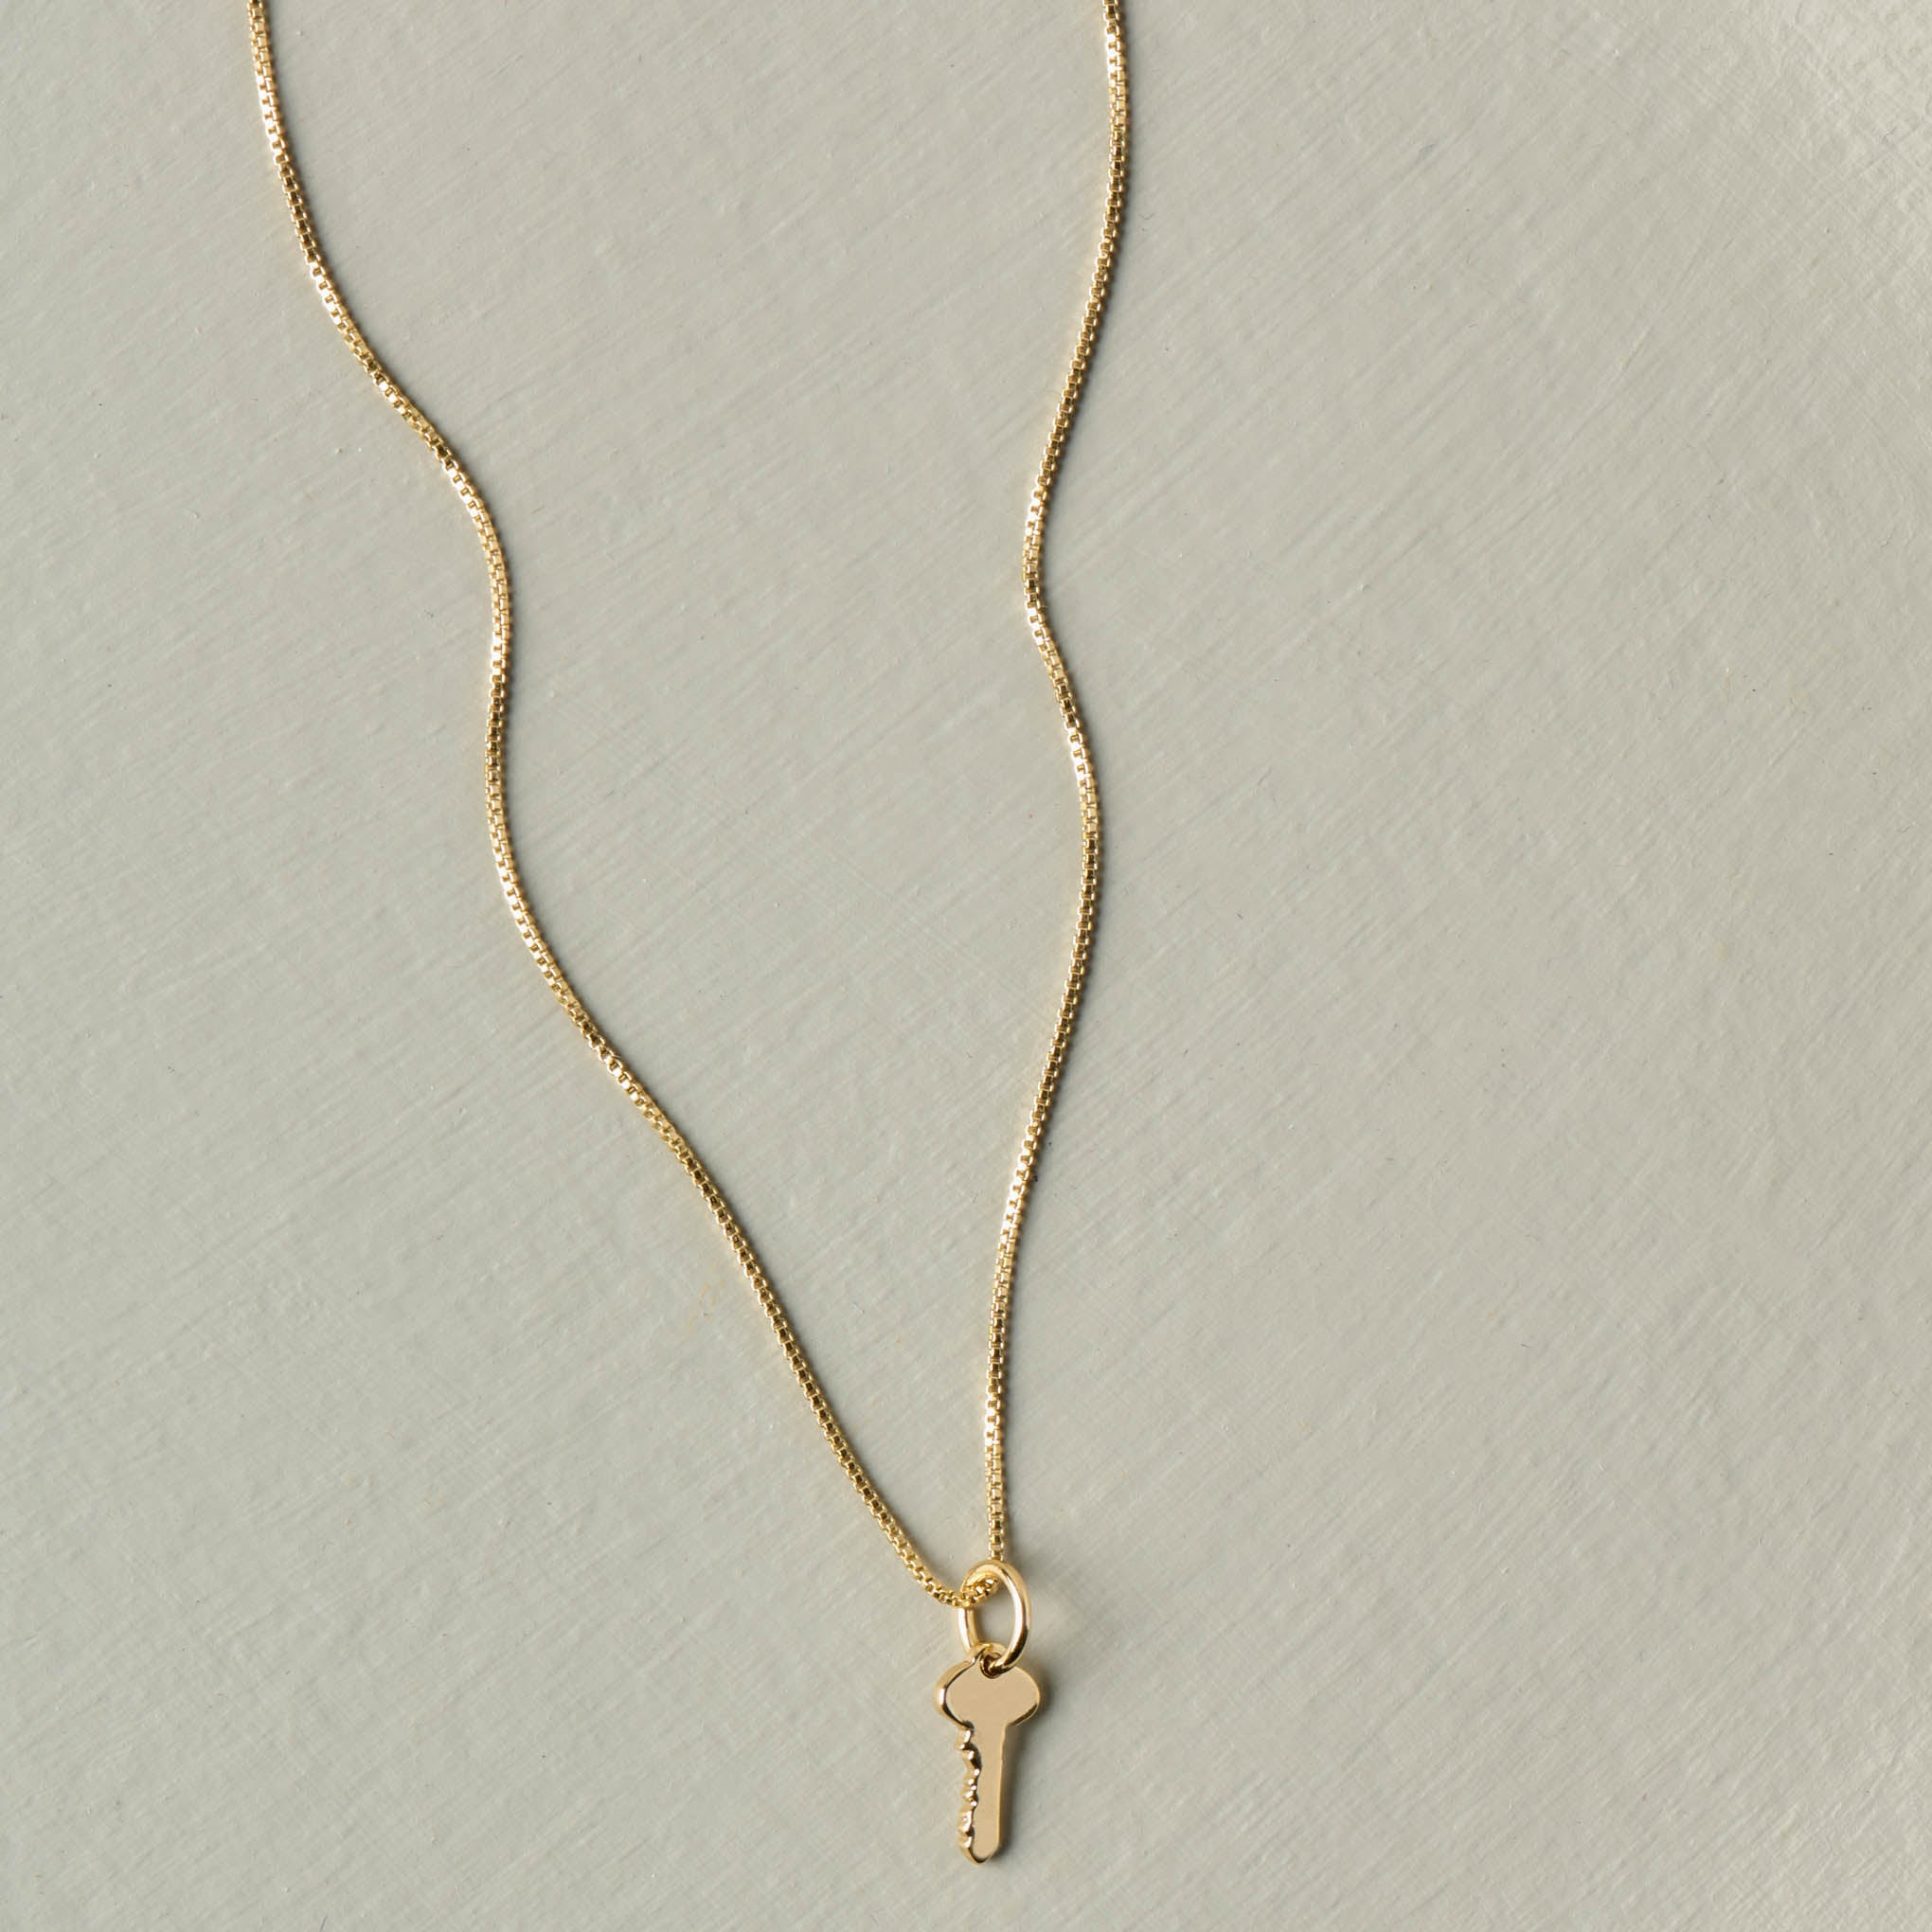 Golden Key Chain Necklace